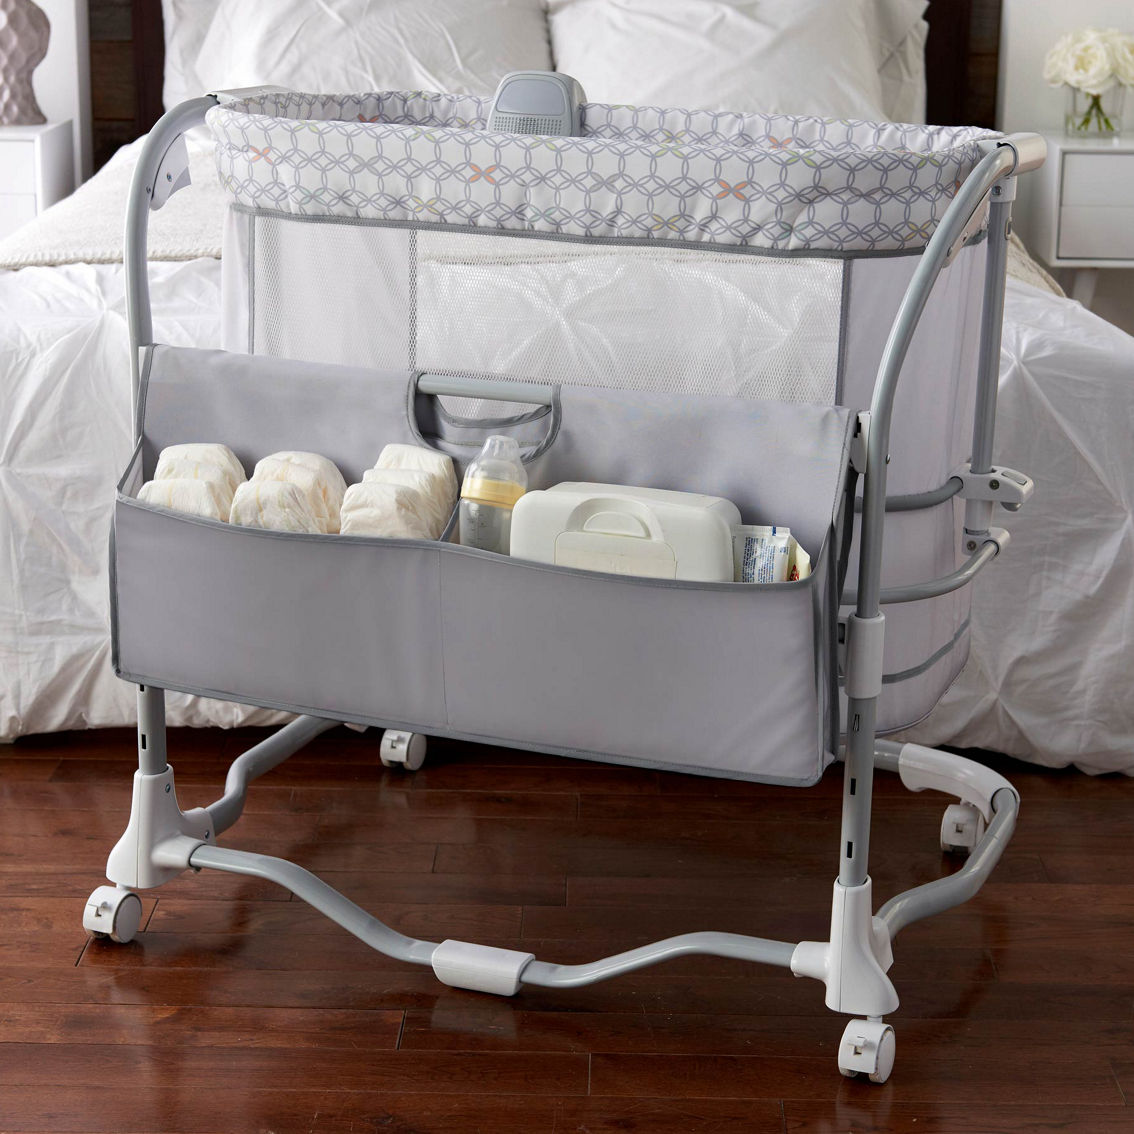 IG Dream and Grow Bassinet - Image 4 of 10